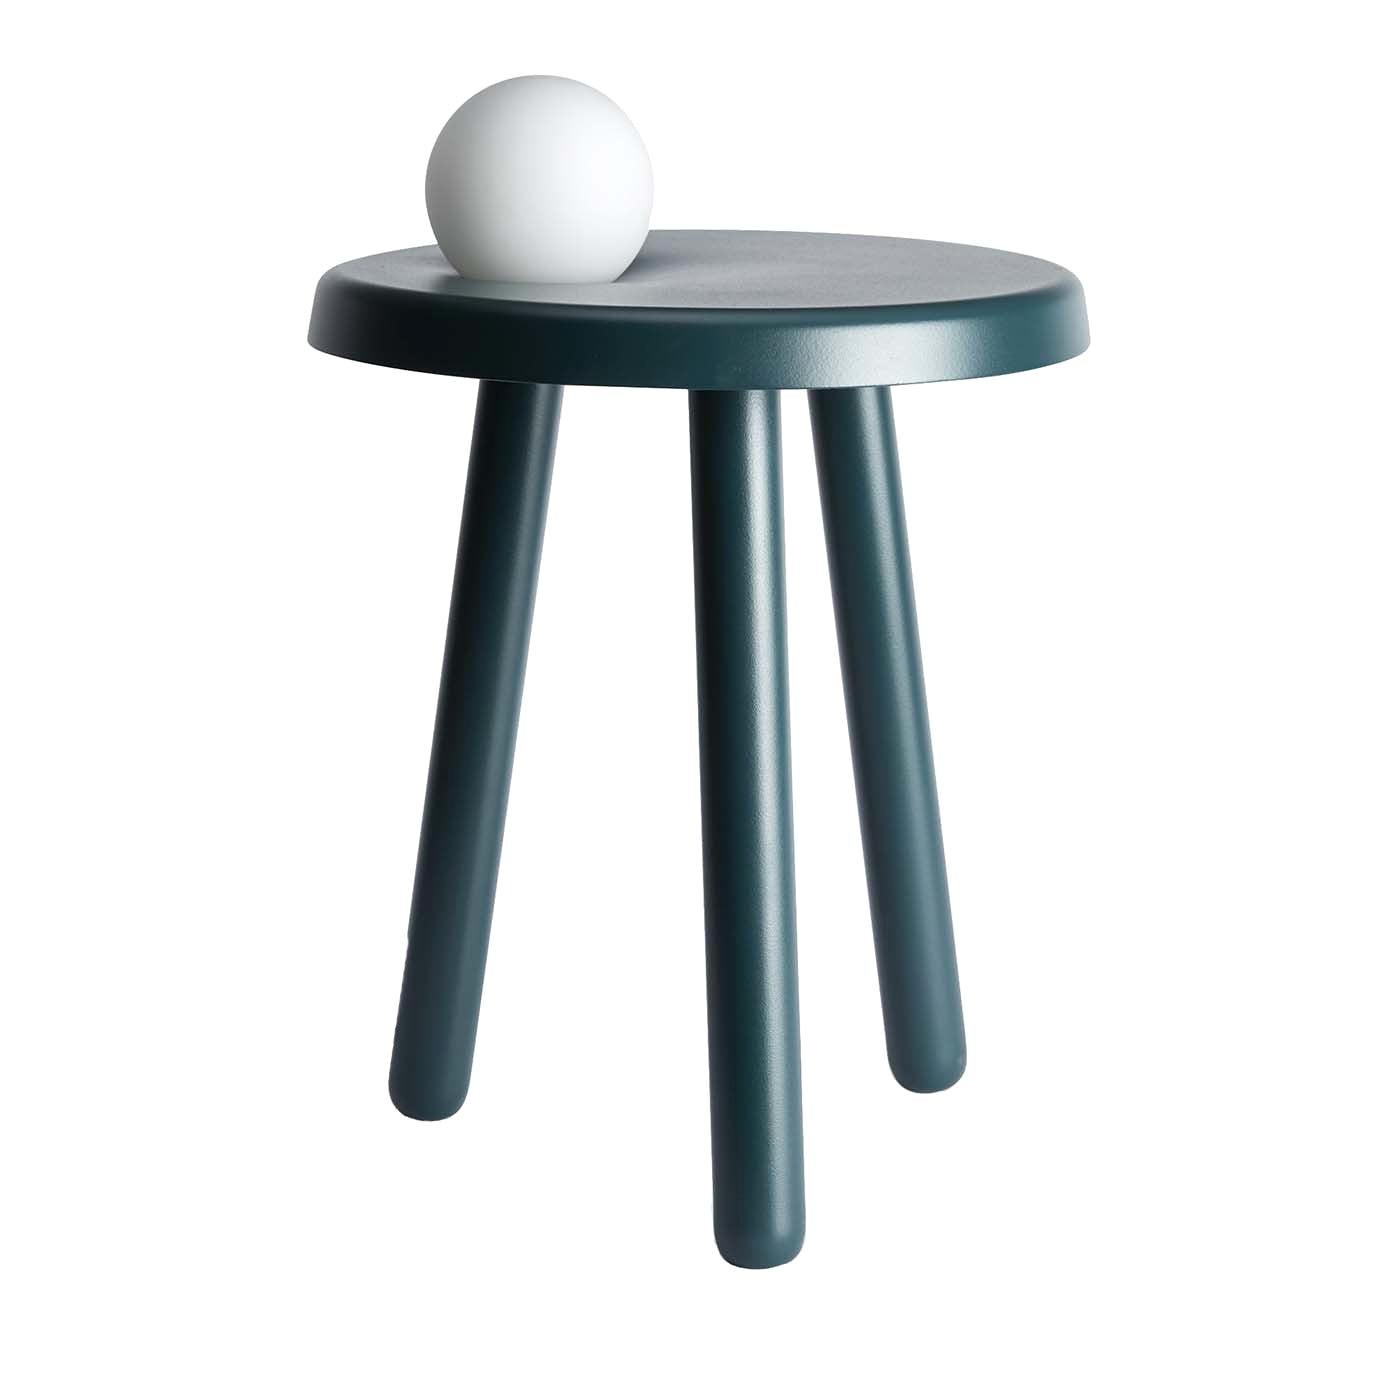 Alby Green Side Table with Light by Mason Editions